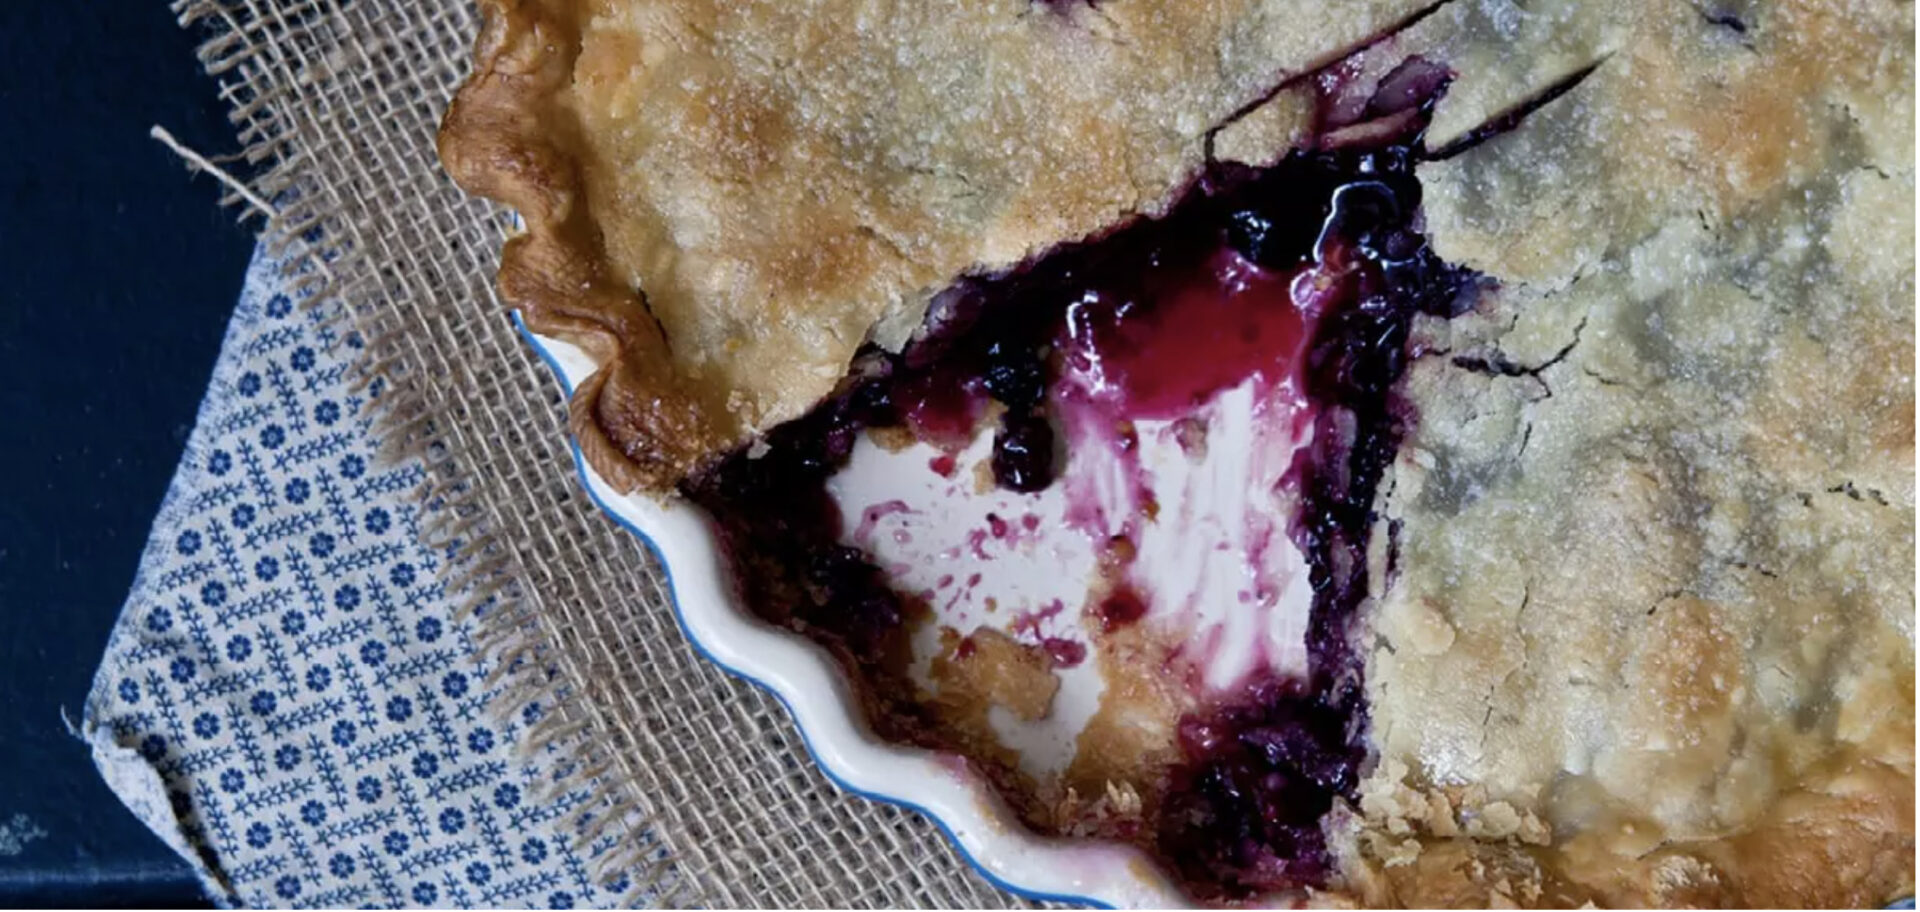 Amethyst blueberry pie nestled in a pie plate with a slice removed